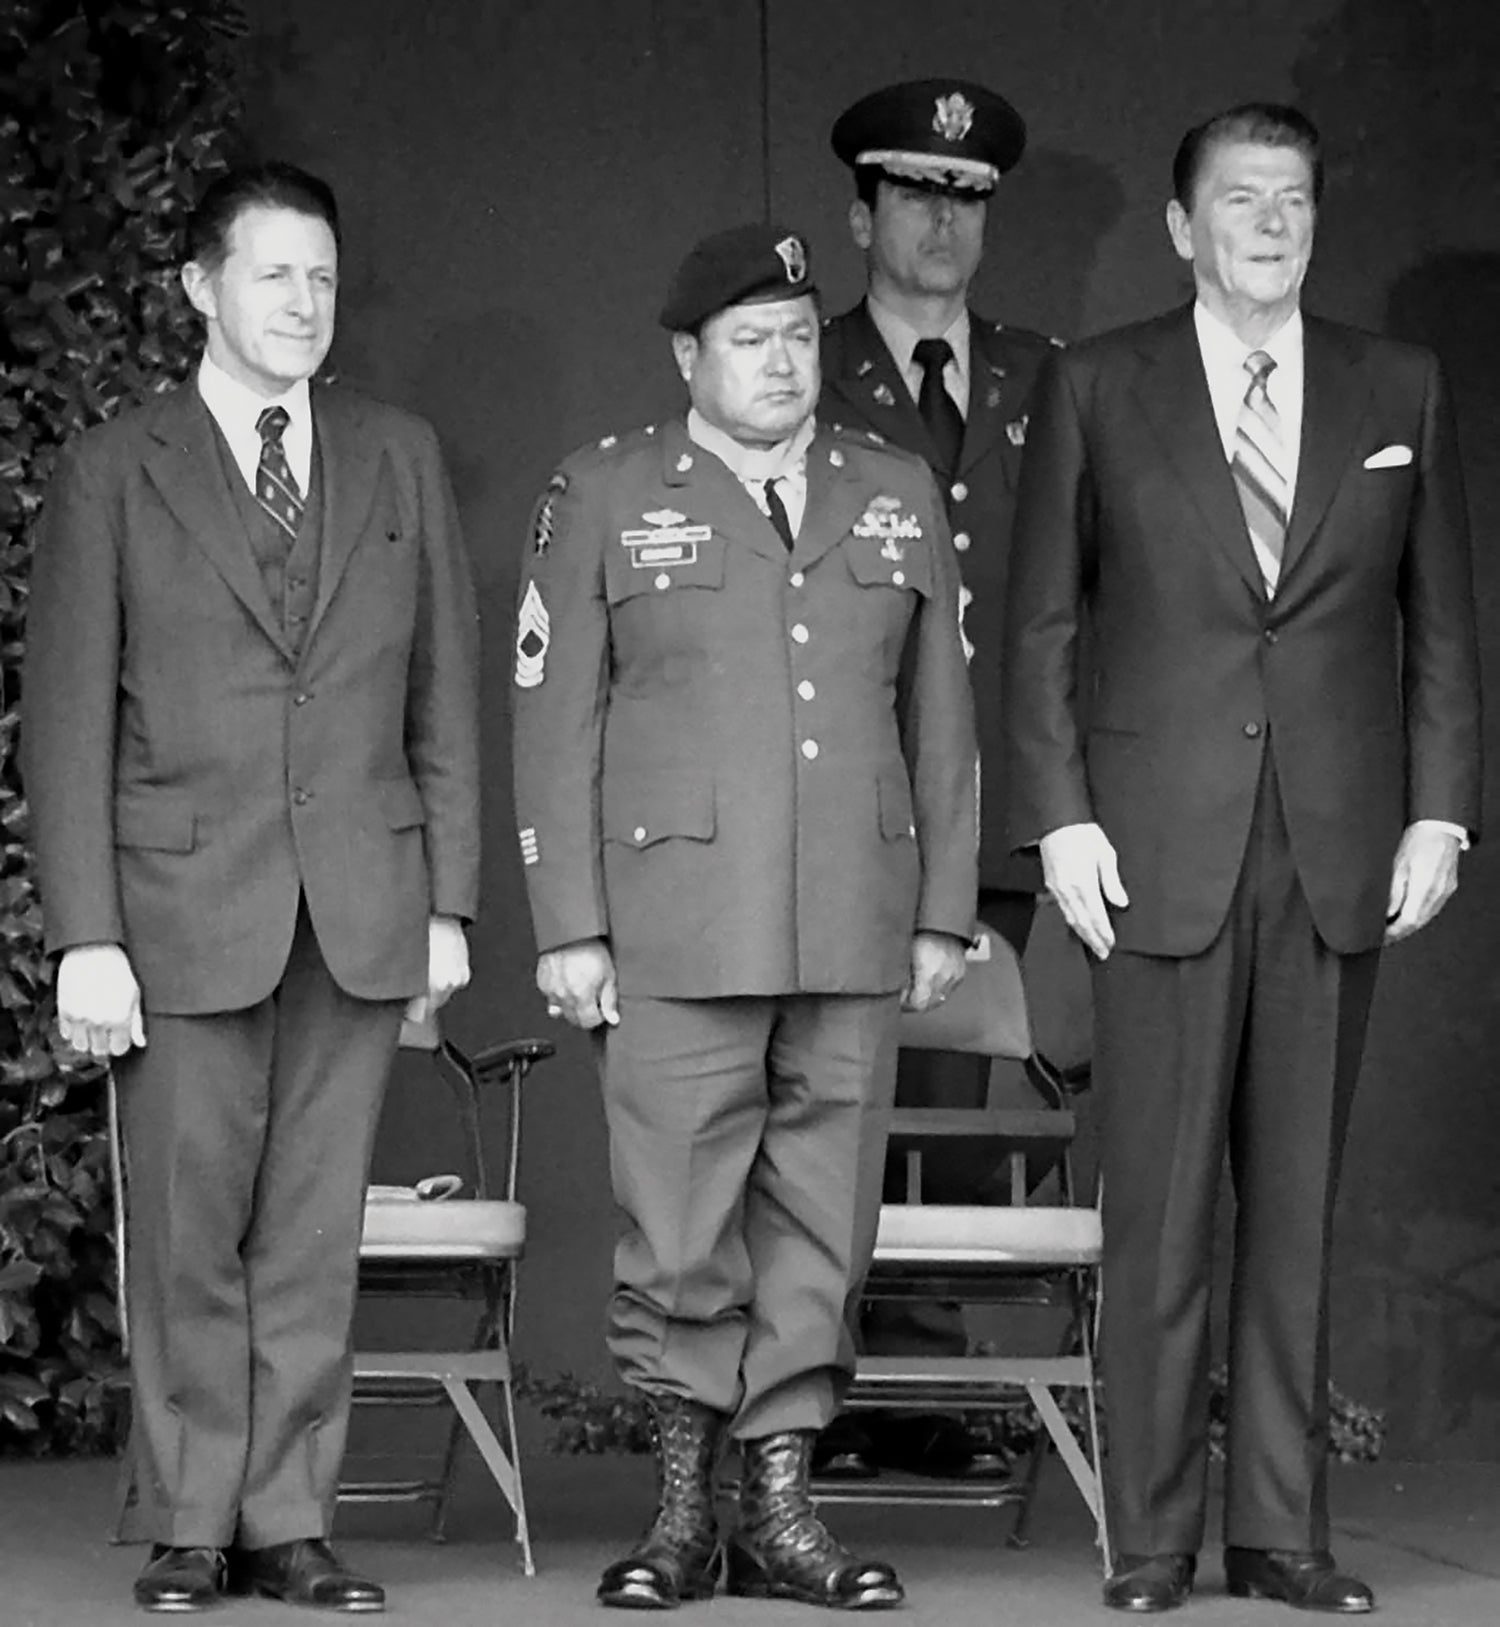 Master Sgt. Roy Benavidez, center, is flanked by Secretary of Defense Caspar Weinberger, left, and President Ronald Reagan at his Medal of Honor ceremony on Feb. 24, 1981. (Credit: Wikipedia/U.S. Air Force)